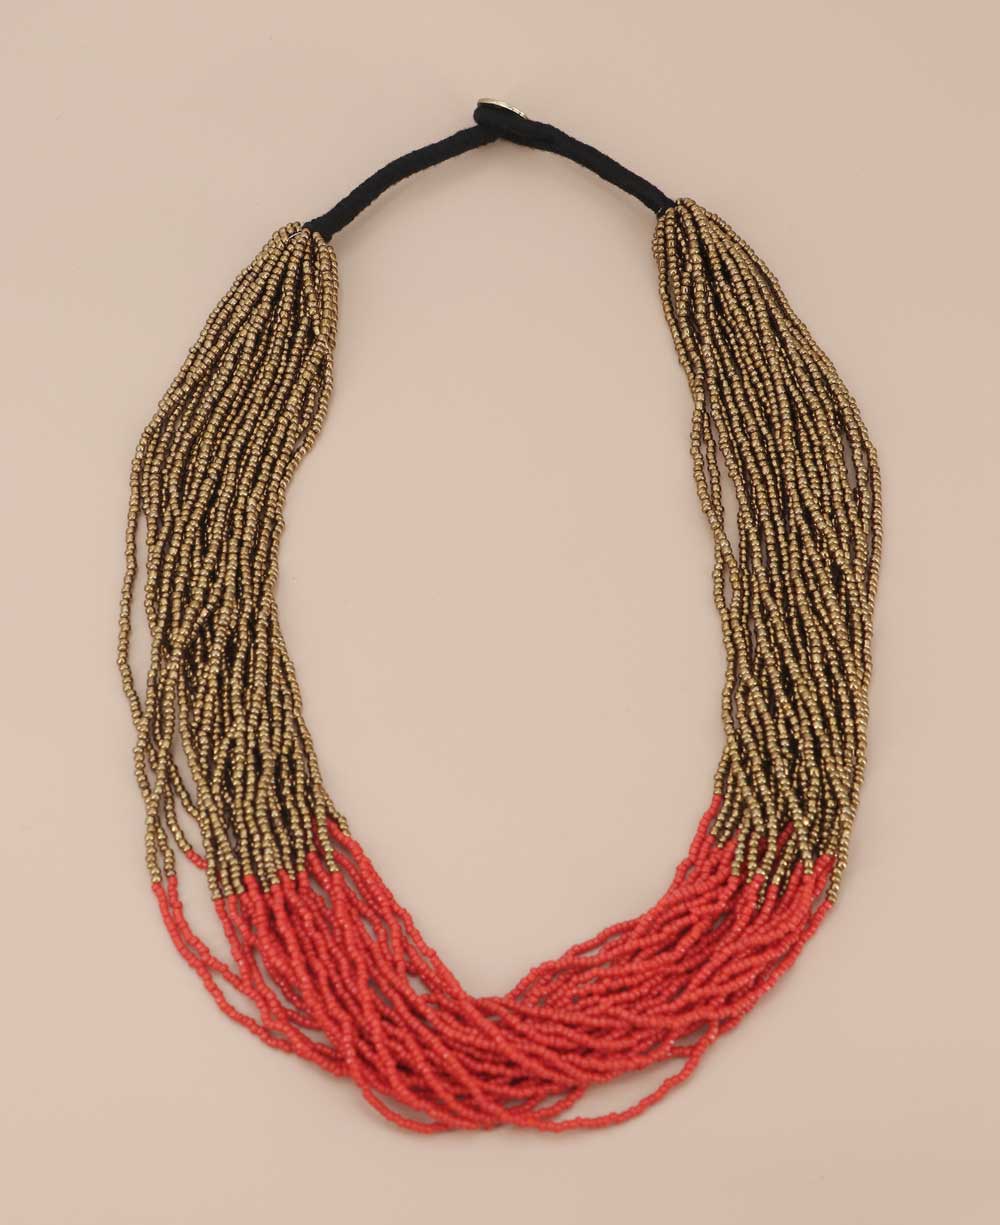 Nepalese duo-tone bead necklace